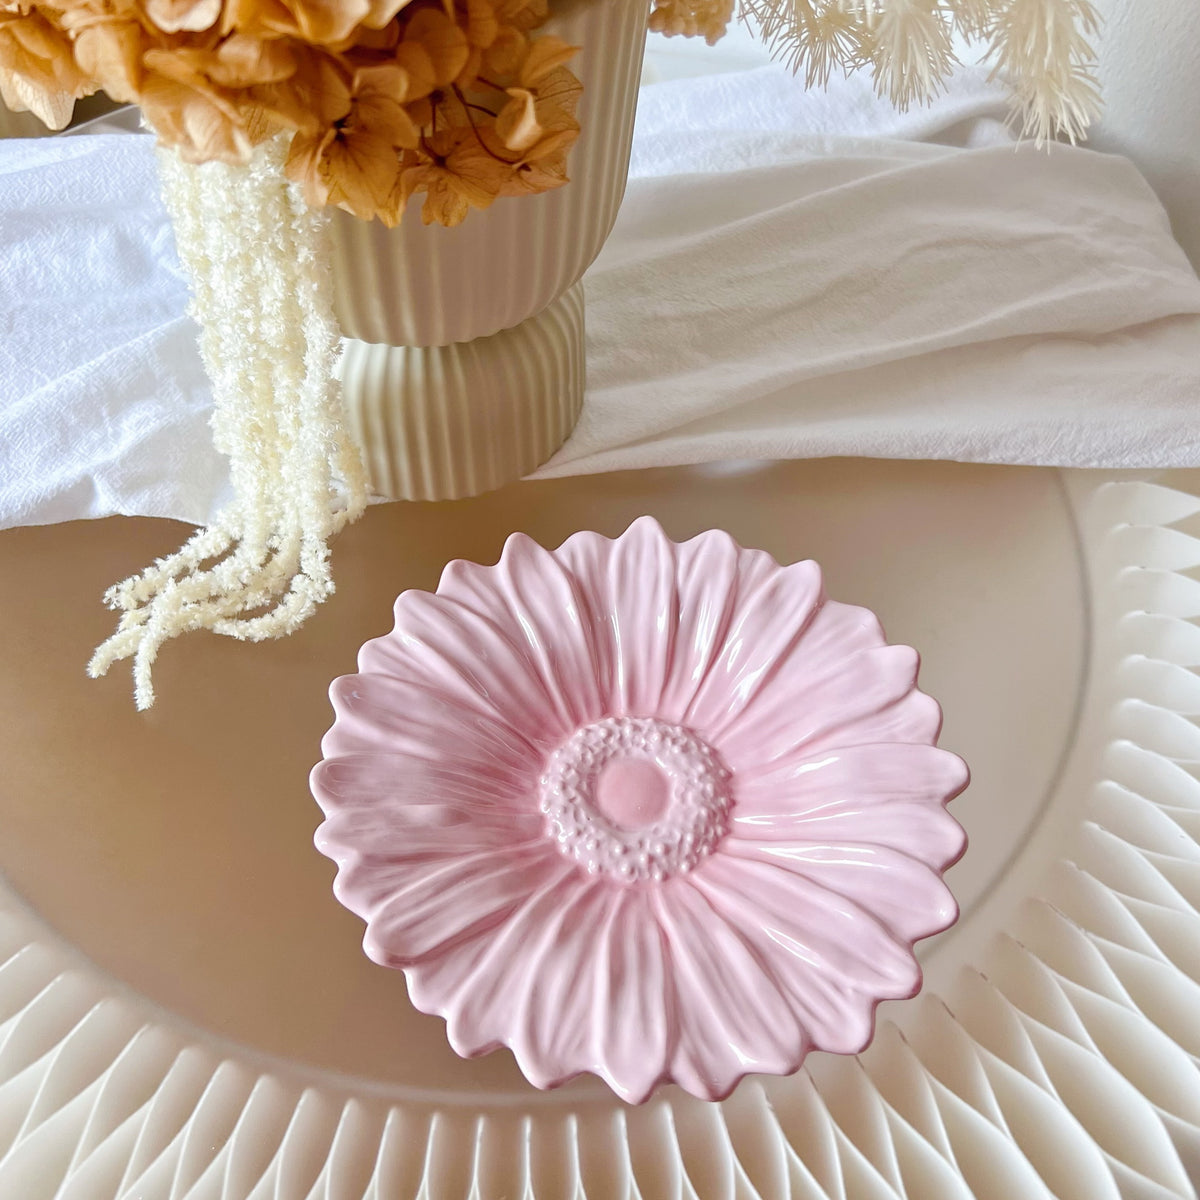 Handcrafted Flower Decorative Tray, Trinket Dish - LMJ Candles